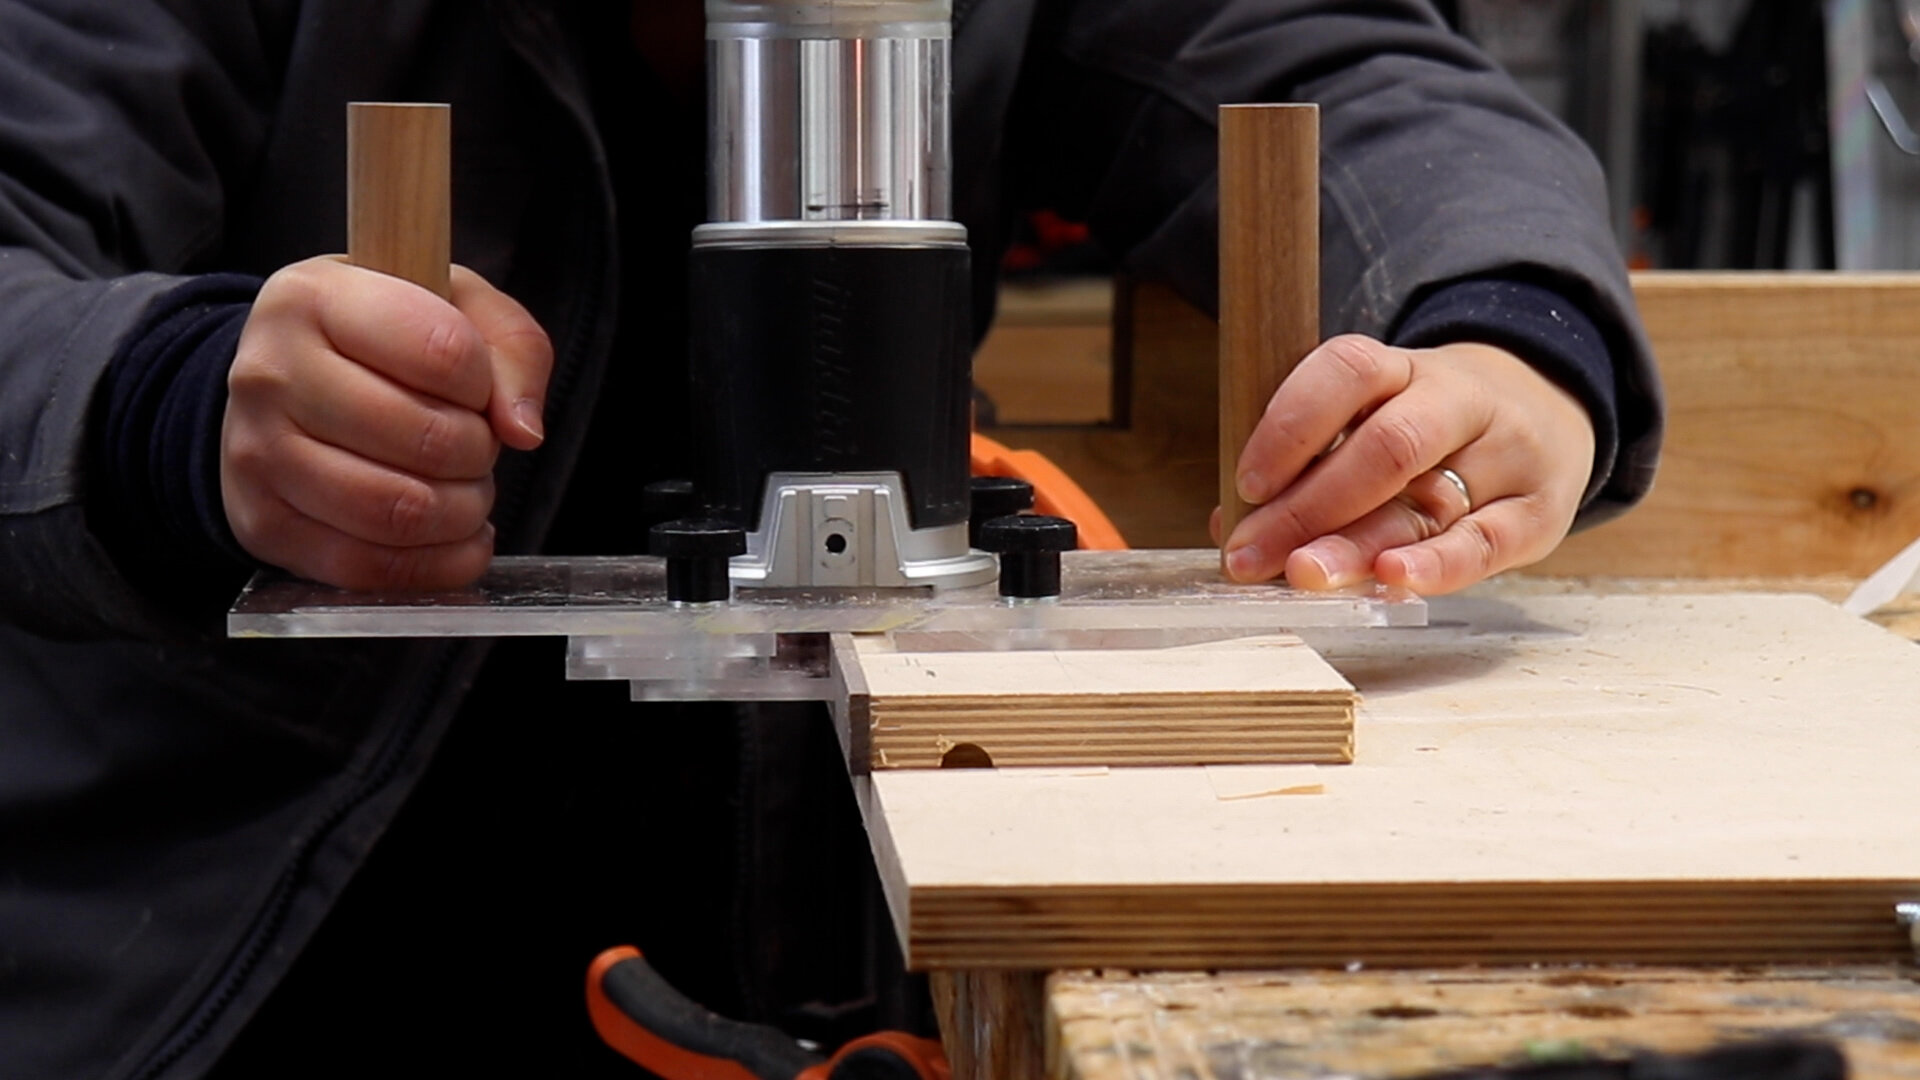 6-IN-ONE Trim Router Jig Plans and Template — 3x3 Custom